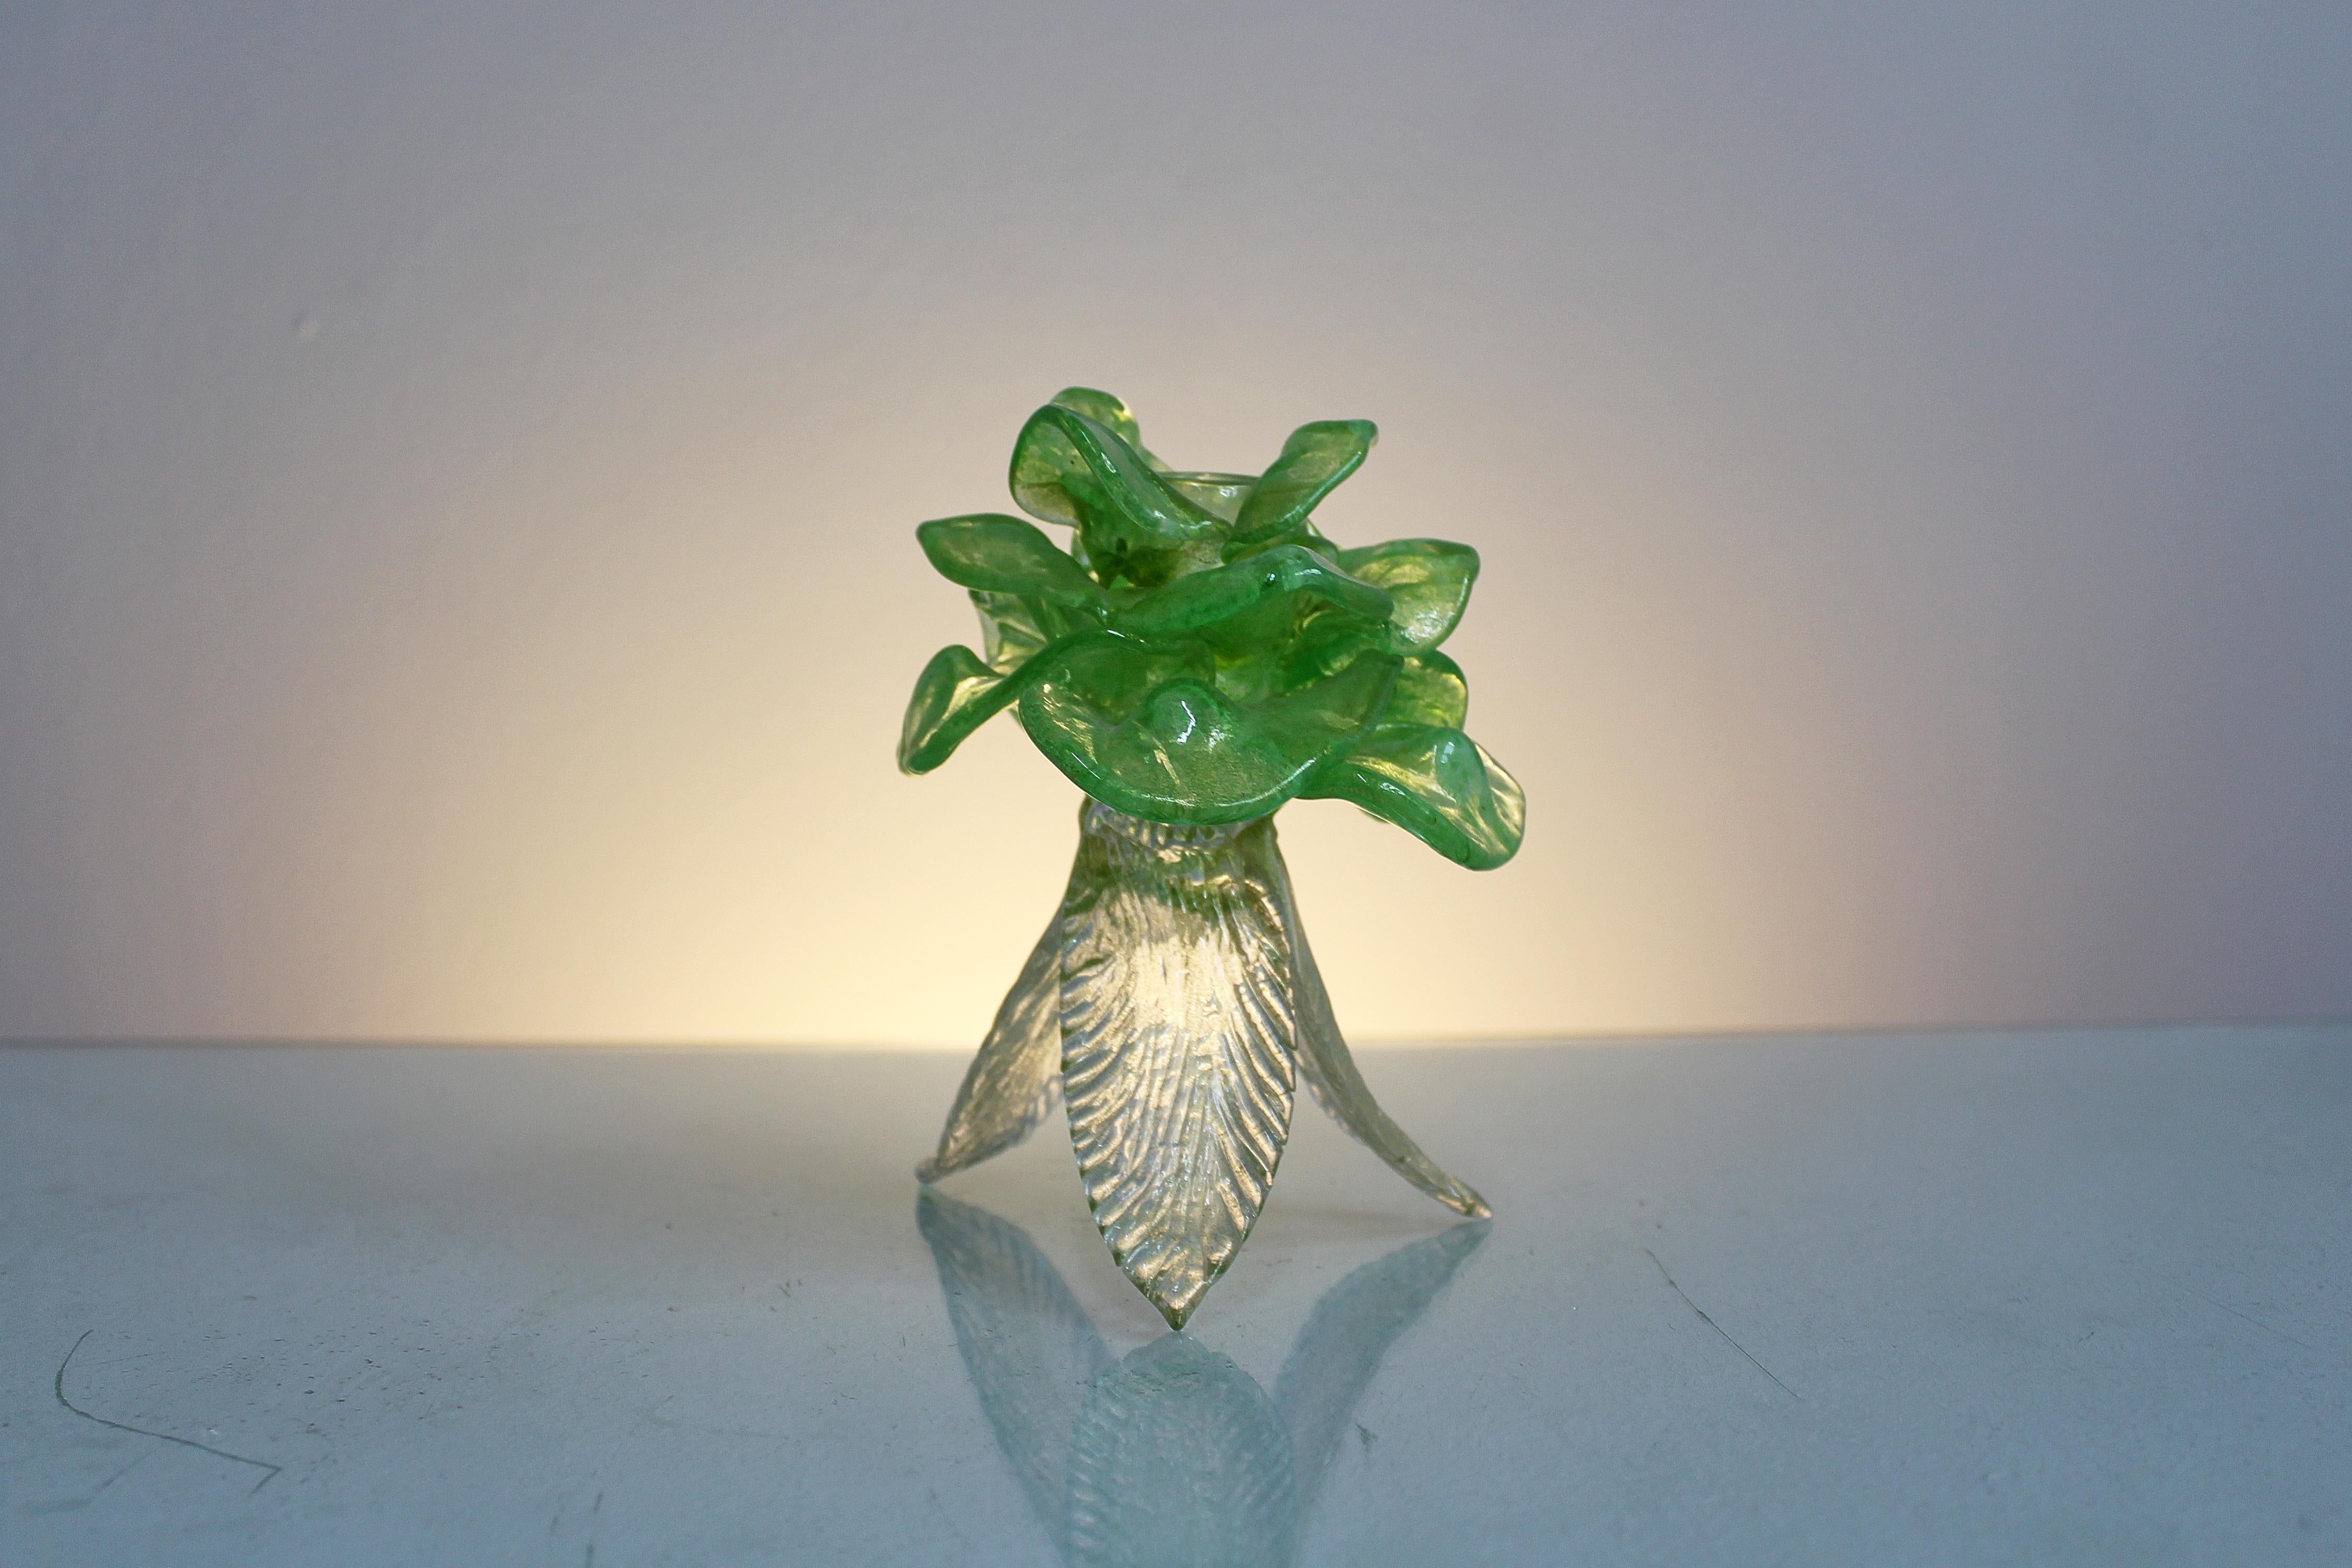 Very fine Murano glass candle holder with green leaves above and transparent below, all with inclusions of gold leaf. Venetian manufacture attributed to Barovier from the 1950s.
Wear consistent with age and use.